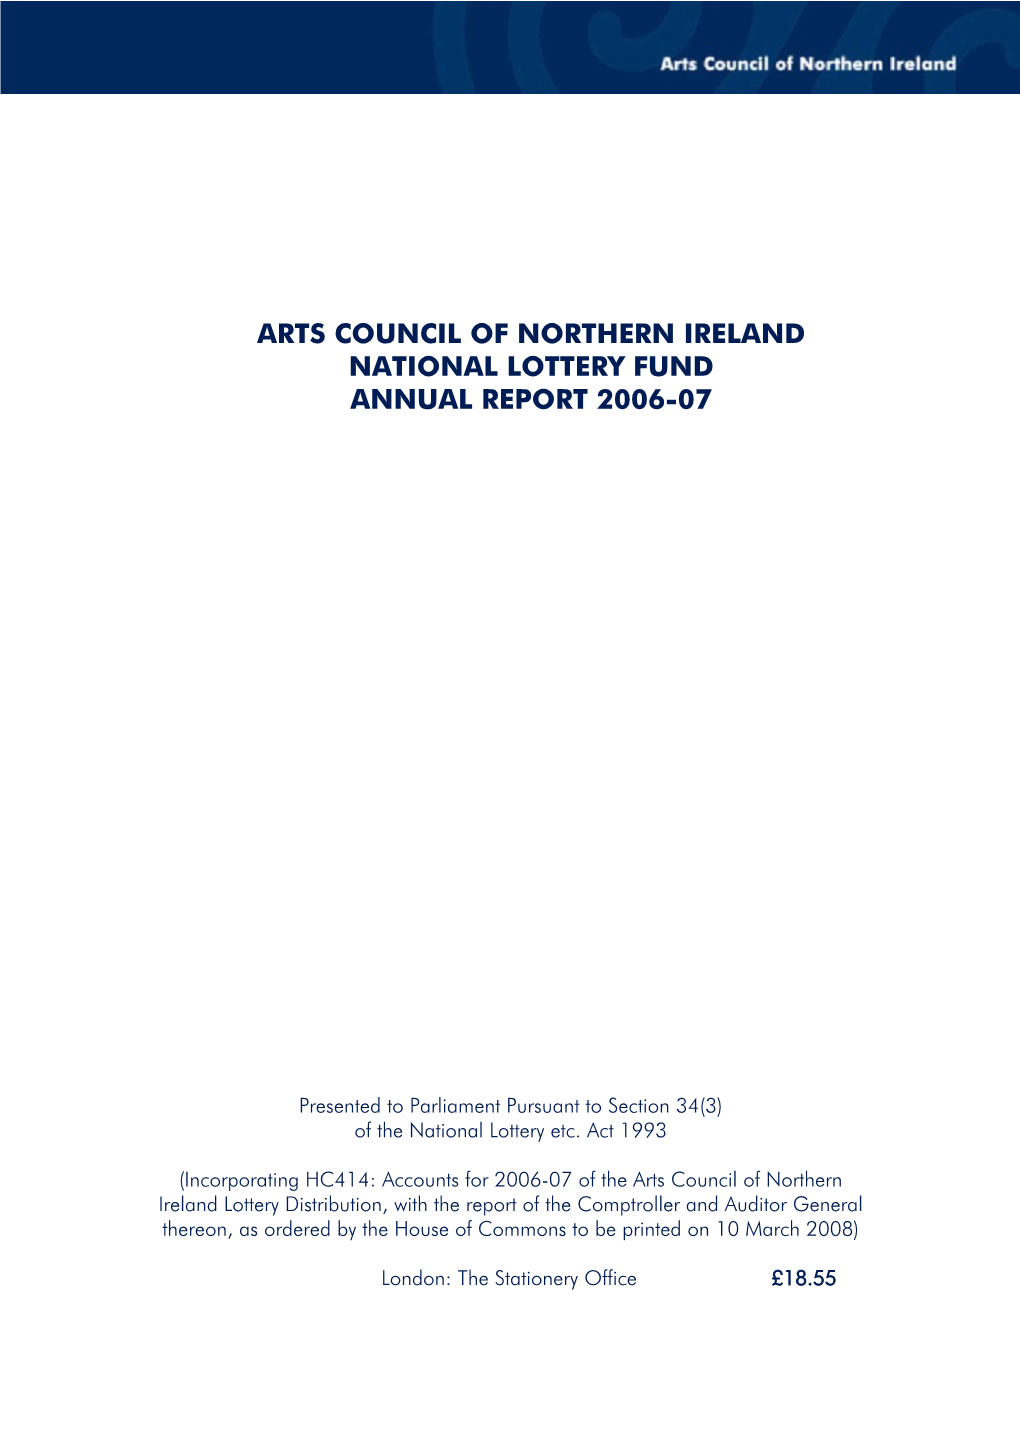 Arts Council of Northern Ireland National Lottery Fund Annual Report 2006-07